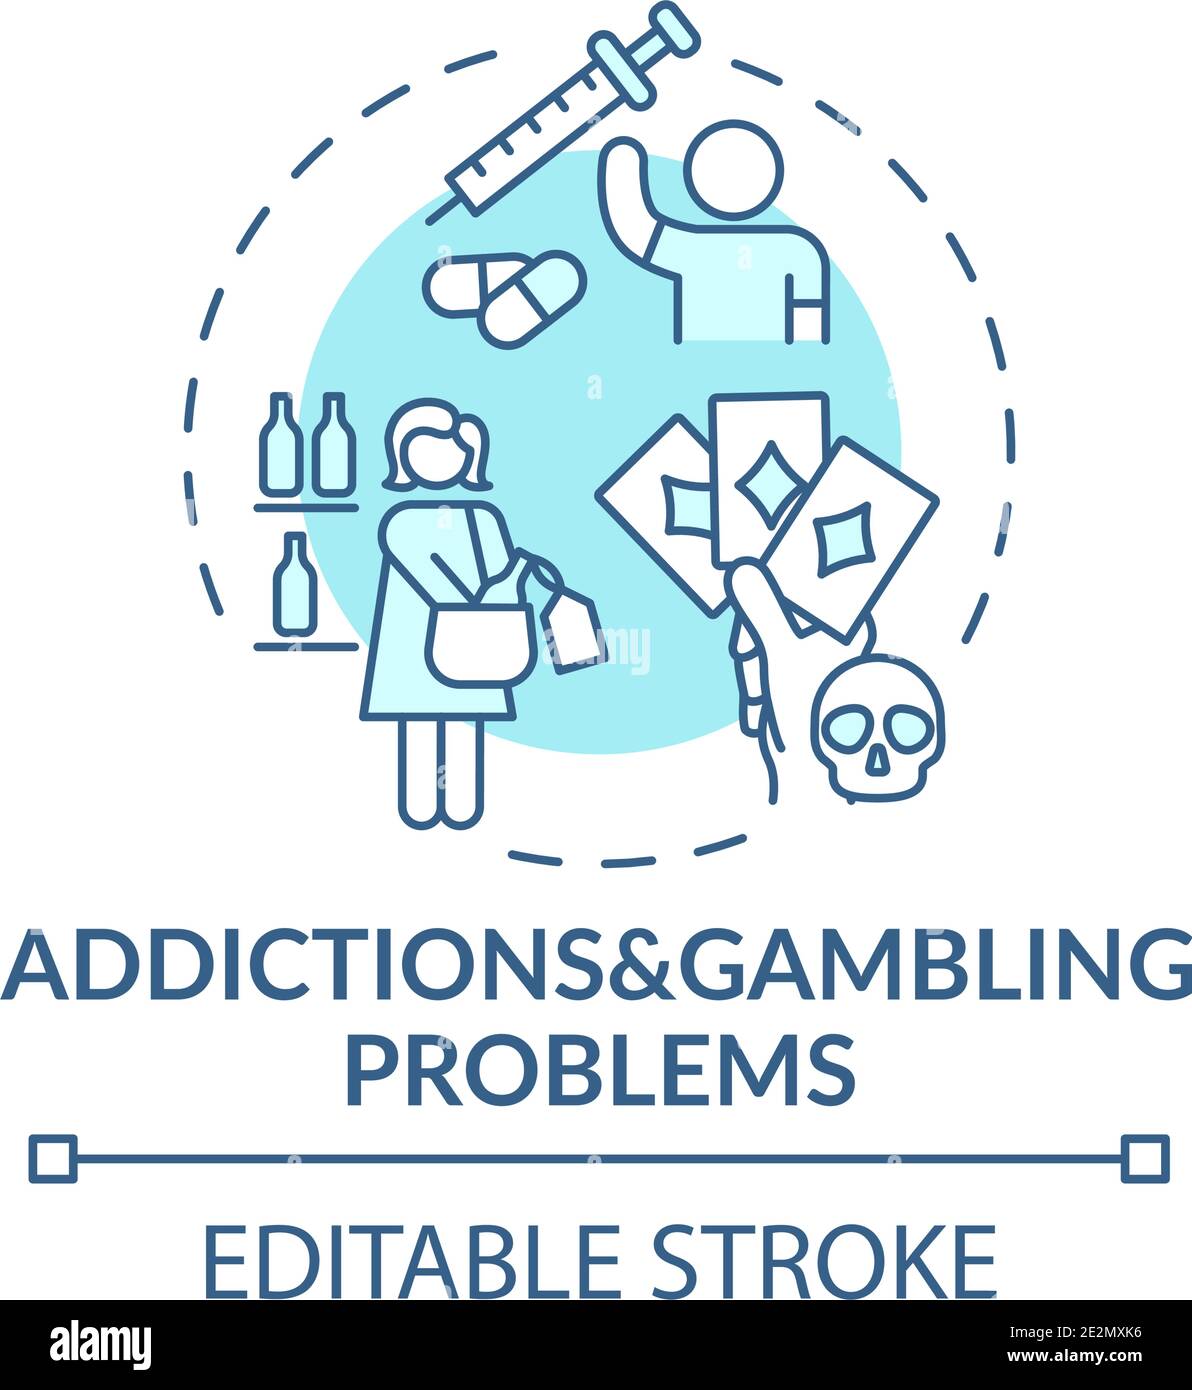 Addictions and gambling problems turquoise concept icon Stock Vector